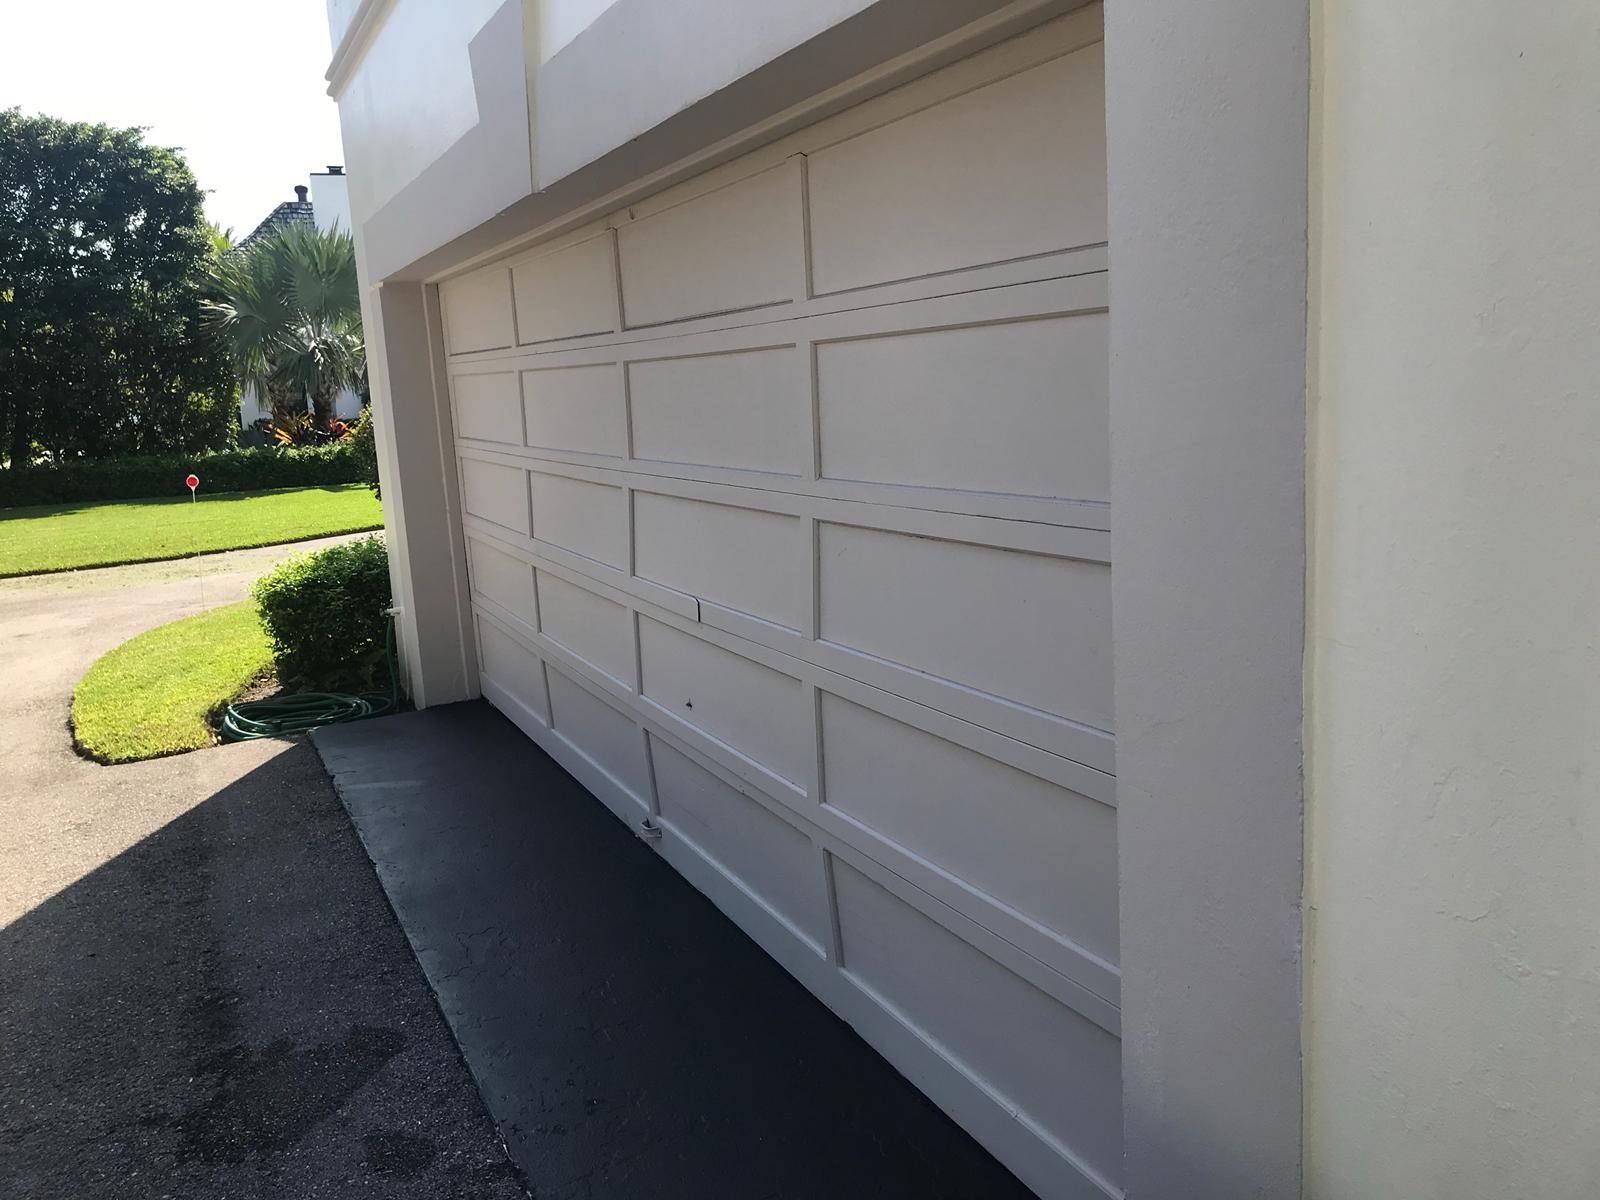 Garage Door Repair Service, Installations and Sales. Garage Door Service, Fast Same-Day Repairs, Book Your Appointment Today, Get Your Garage Door Repair Now. Broward, Palm Beach, Miami-Dade